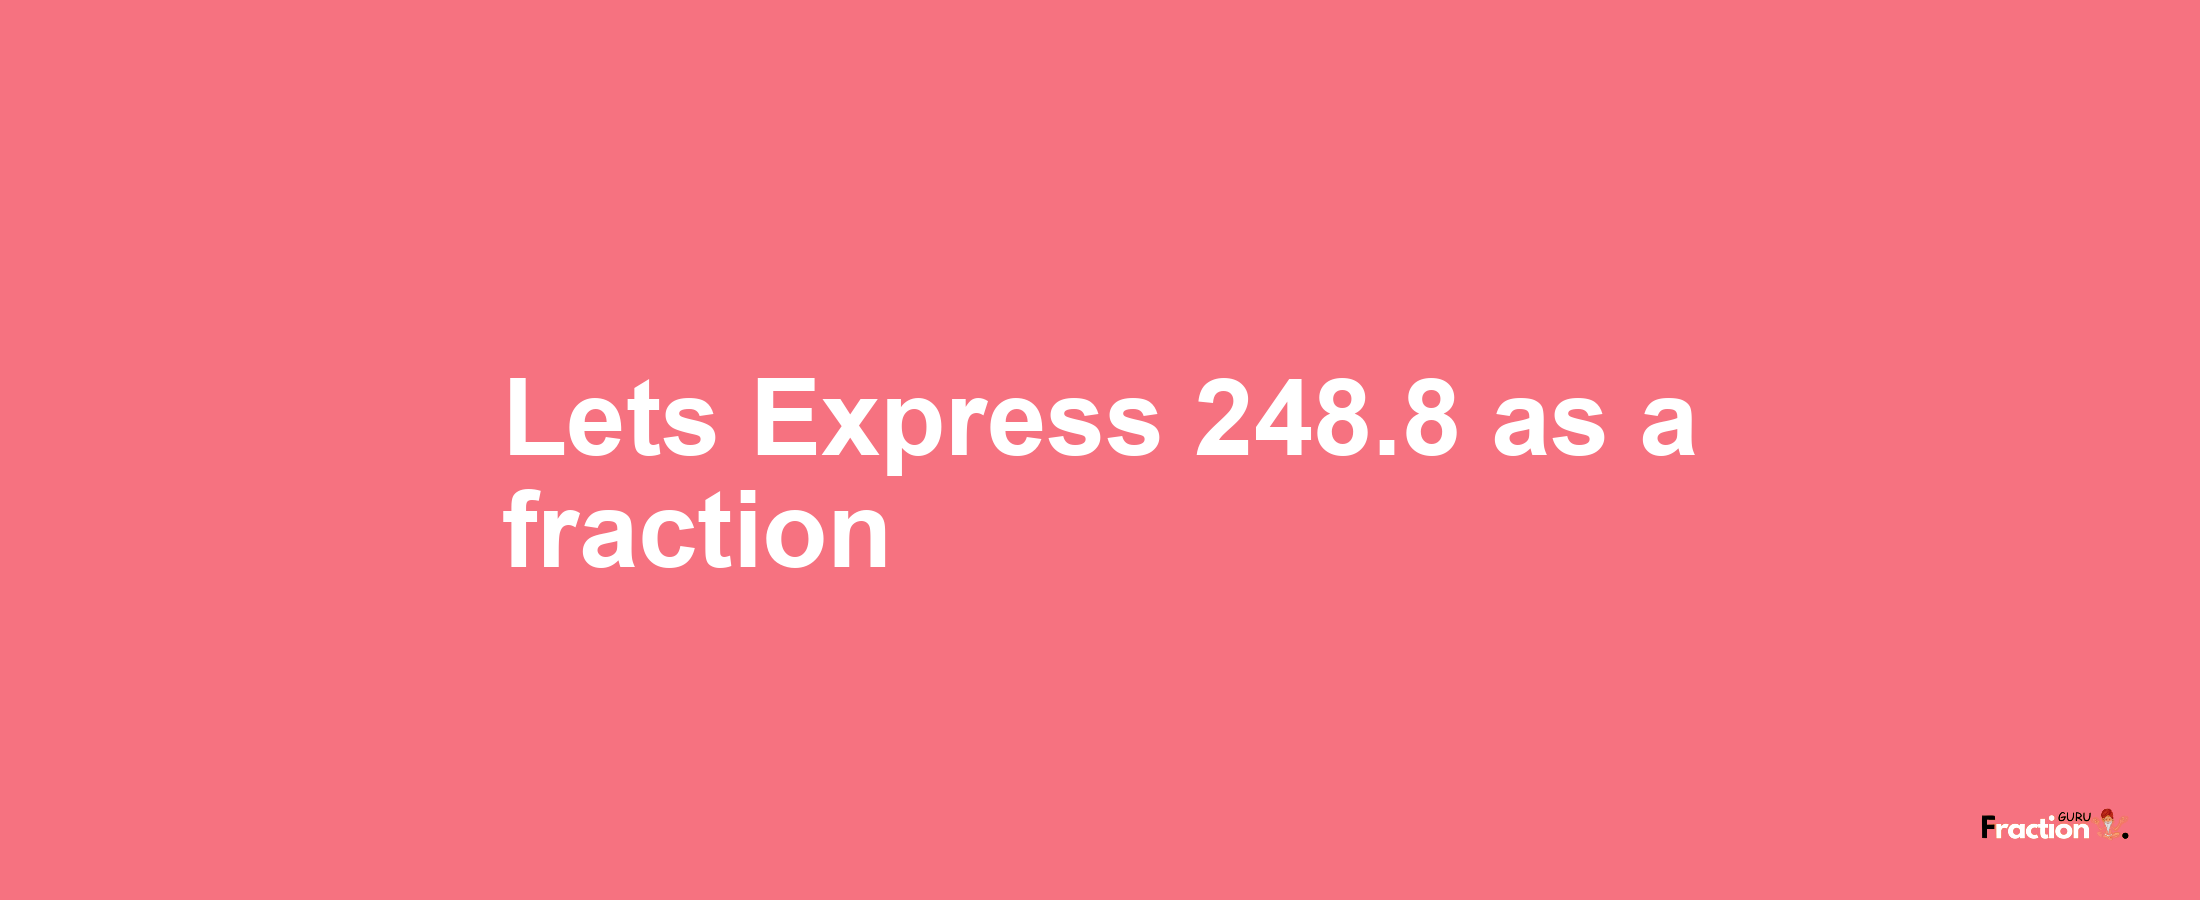 Lets Express 248.8 as afraction